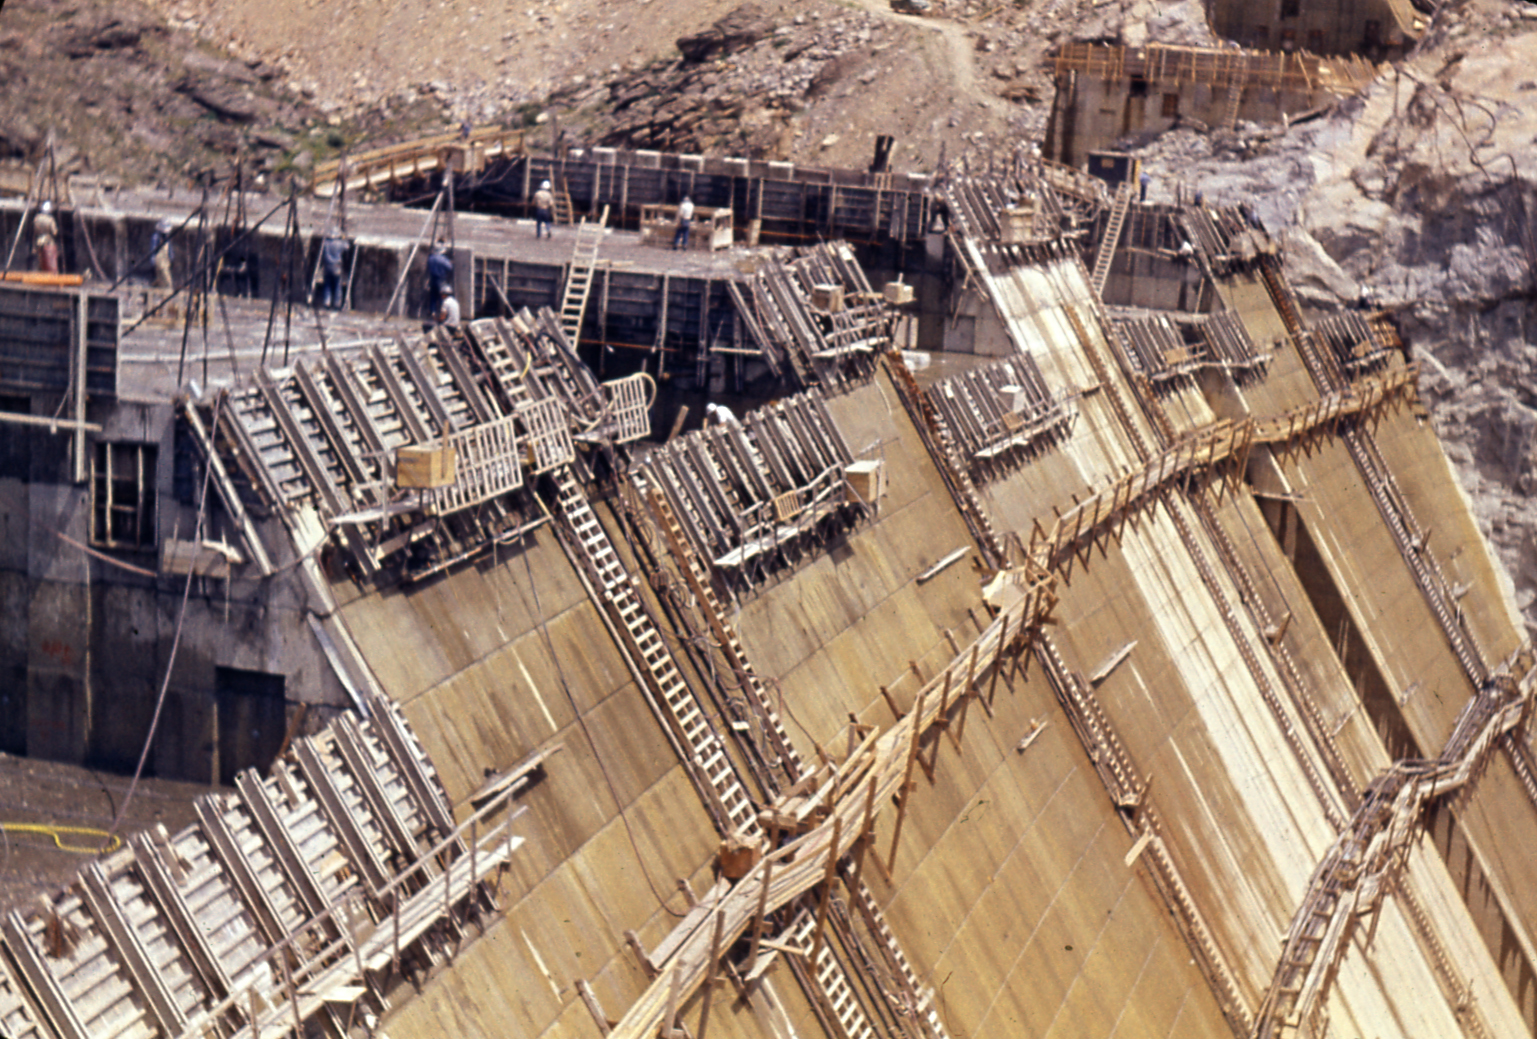 This picture shows the front of the dam under construction in 1954.